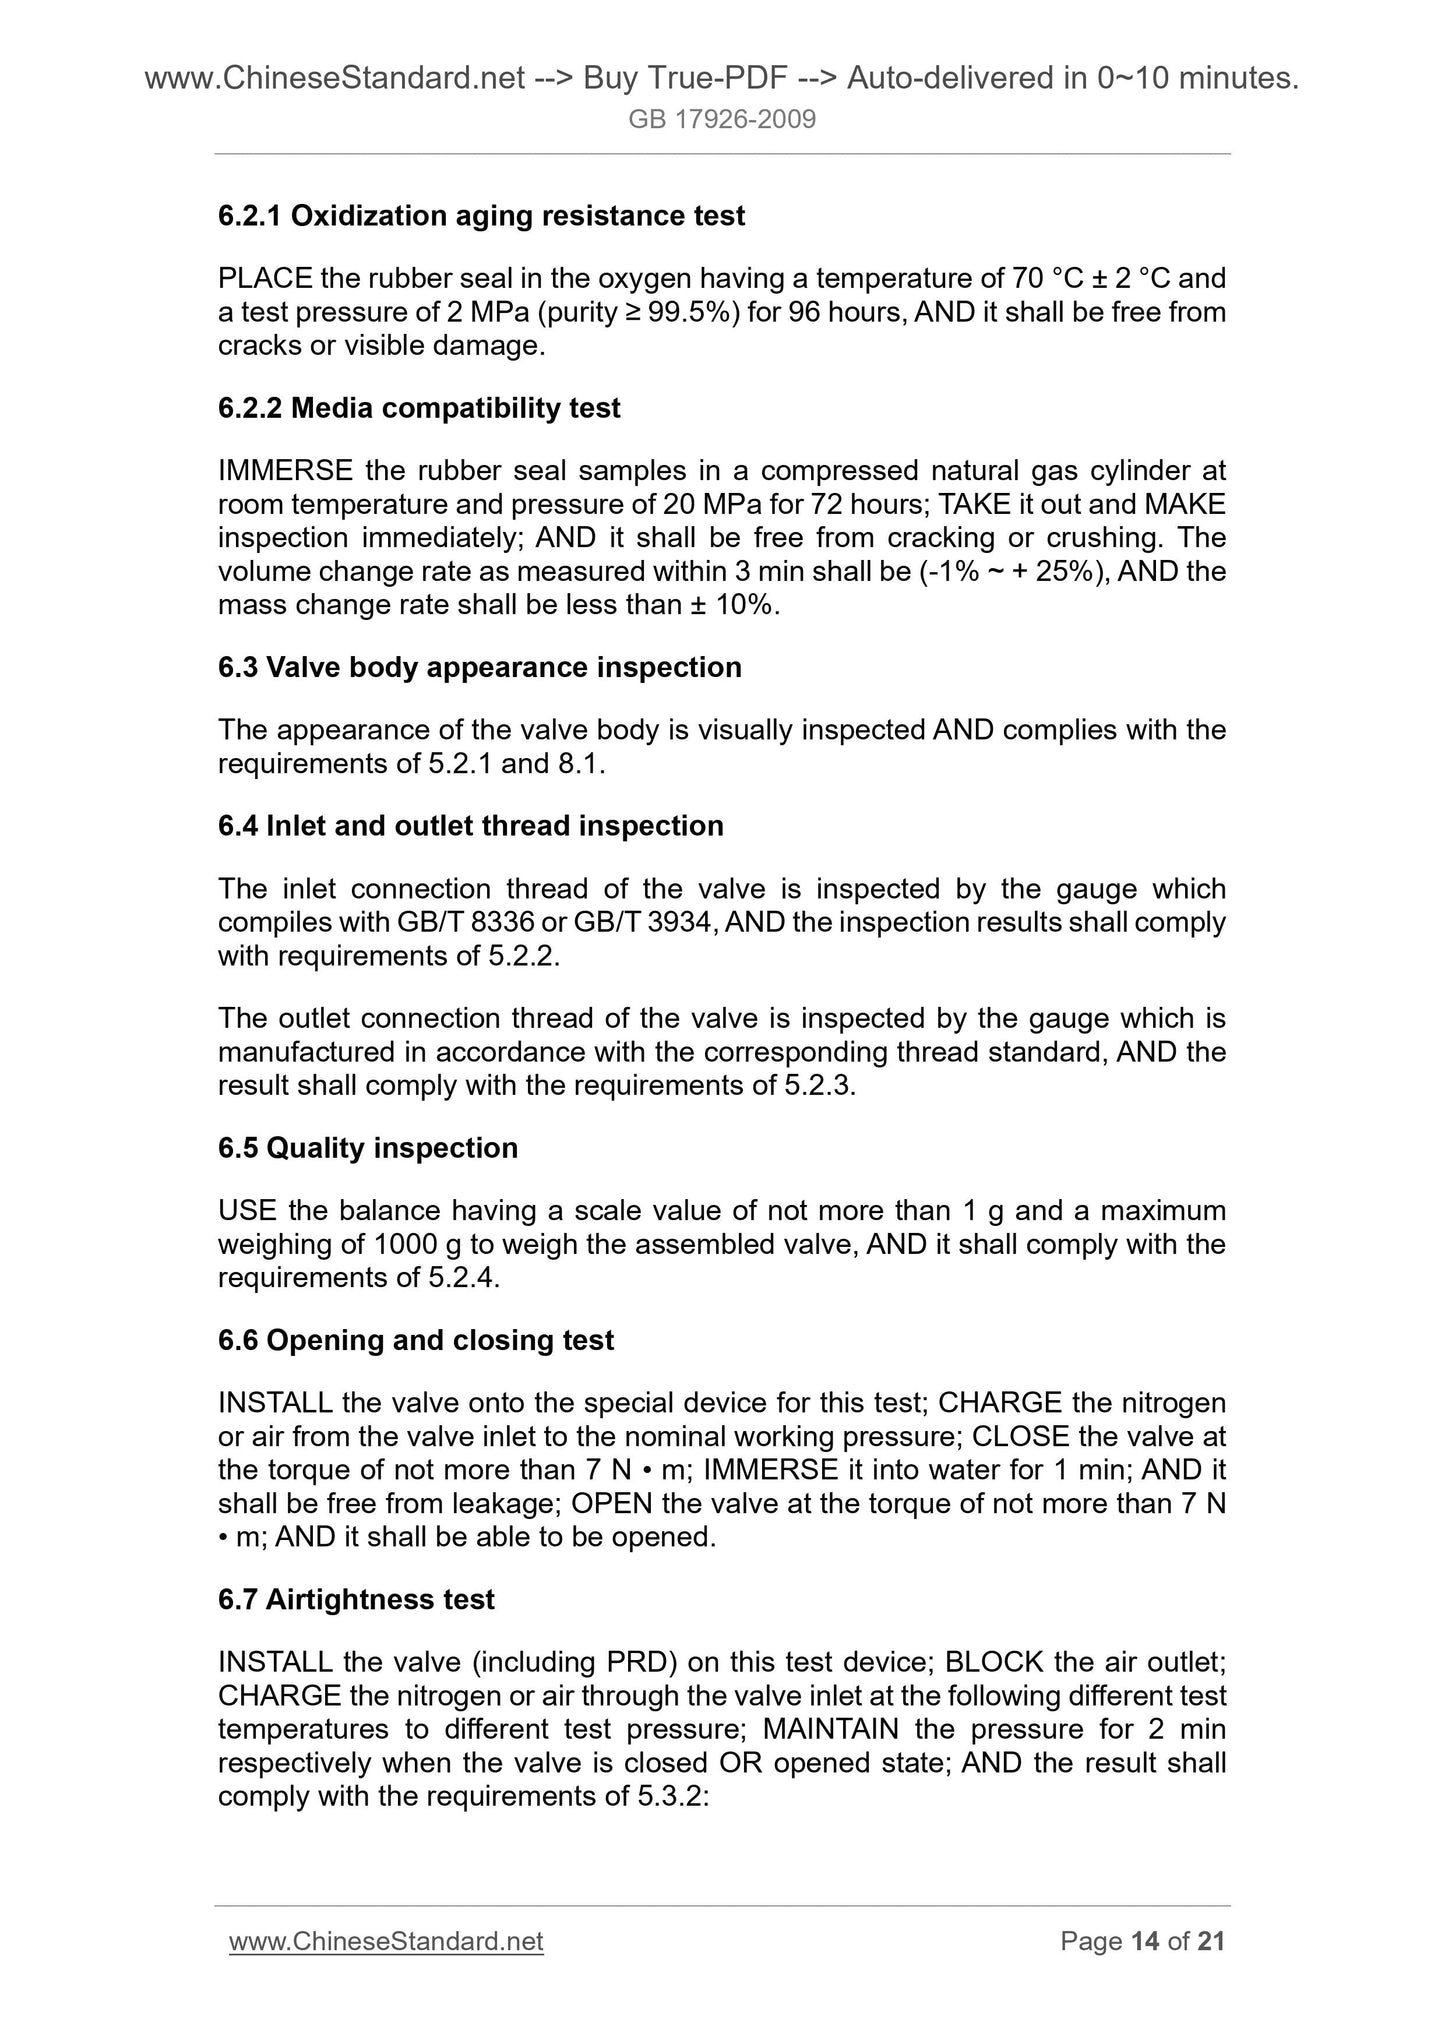 GB 17926-2009 Page 7